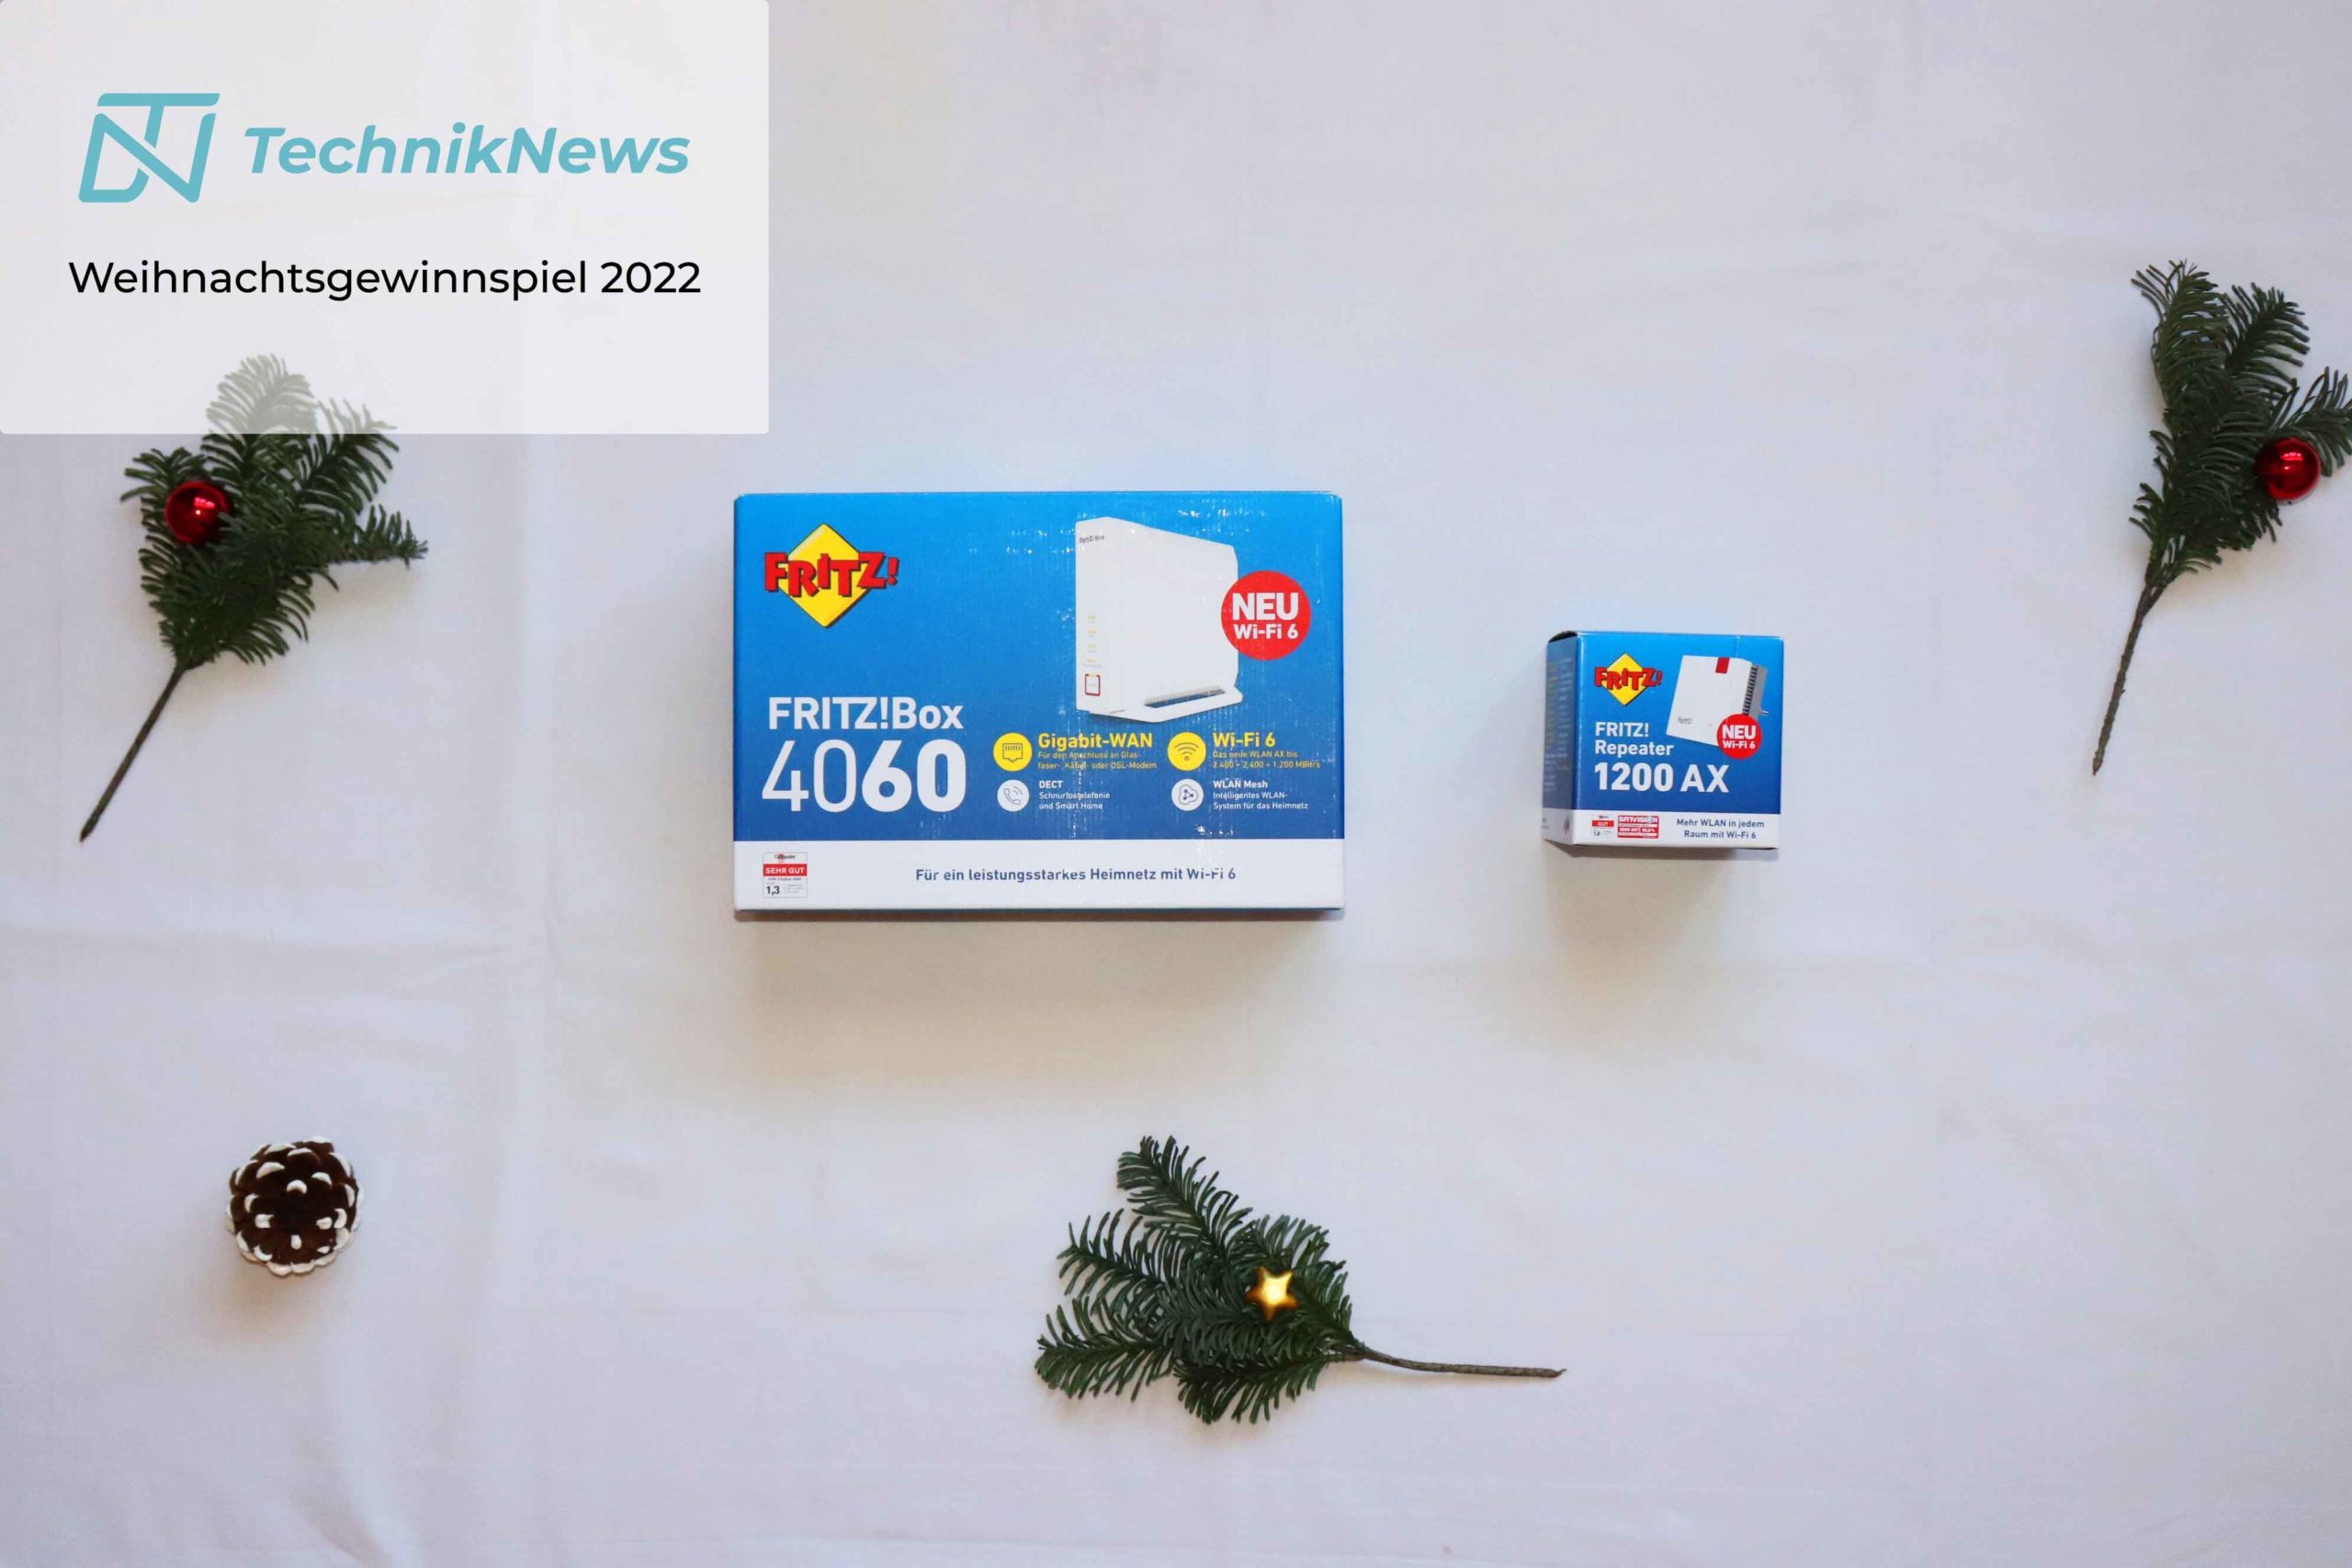 TechnikNews Christmas competition 2022 Fritzbox 4060 Fritz repeater 1200 AX